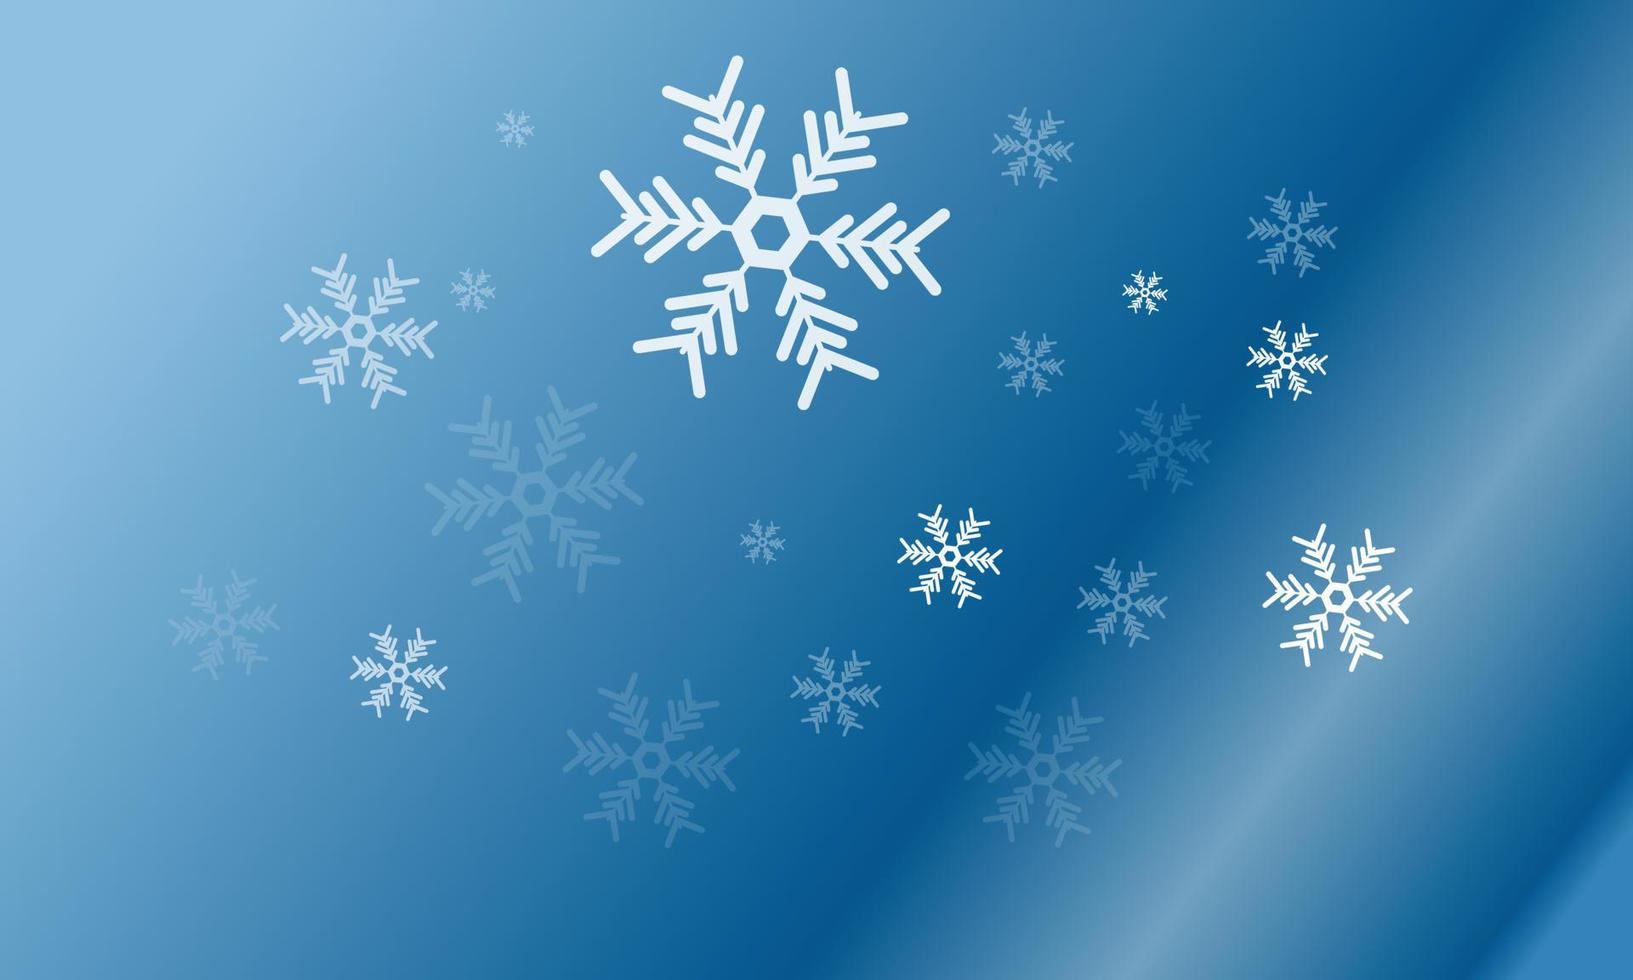 Winter vector background, snowflakes falling and covered over blue space, for design, use as abstract wallpaper or greeting card, Christmas and New Year.